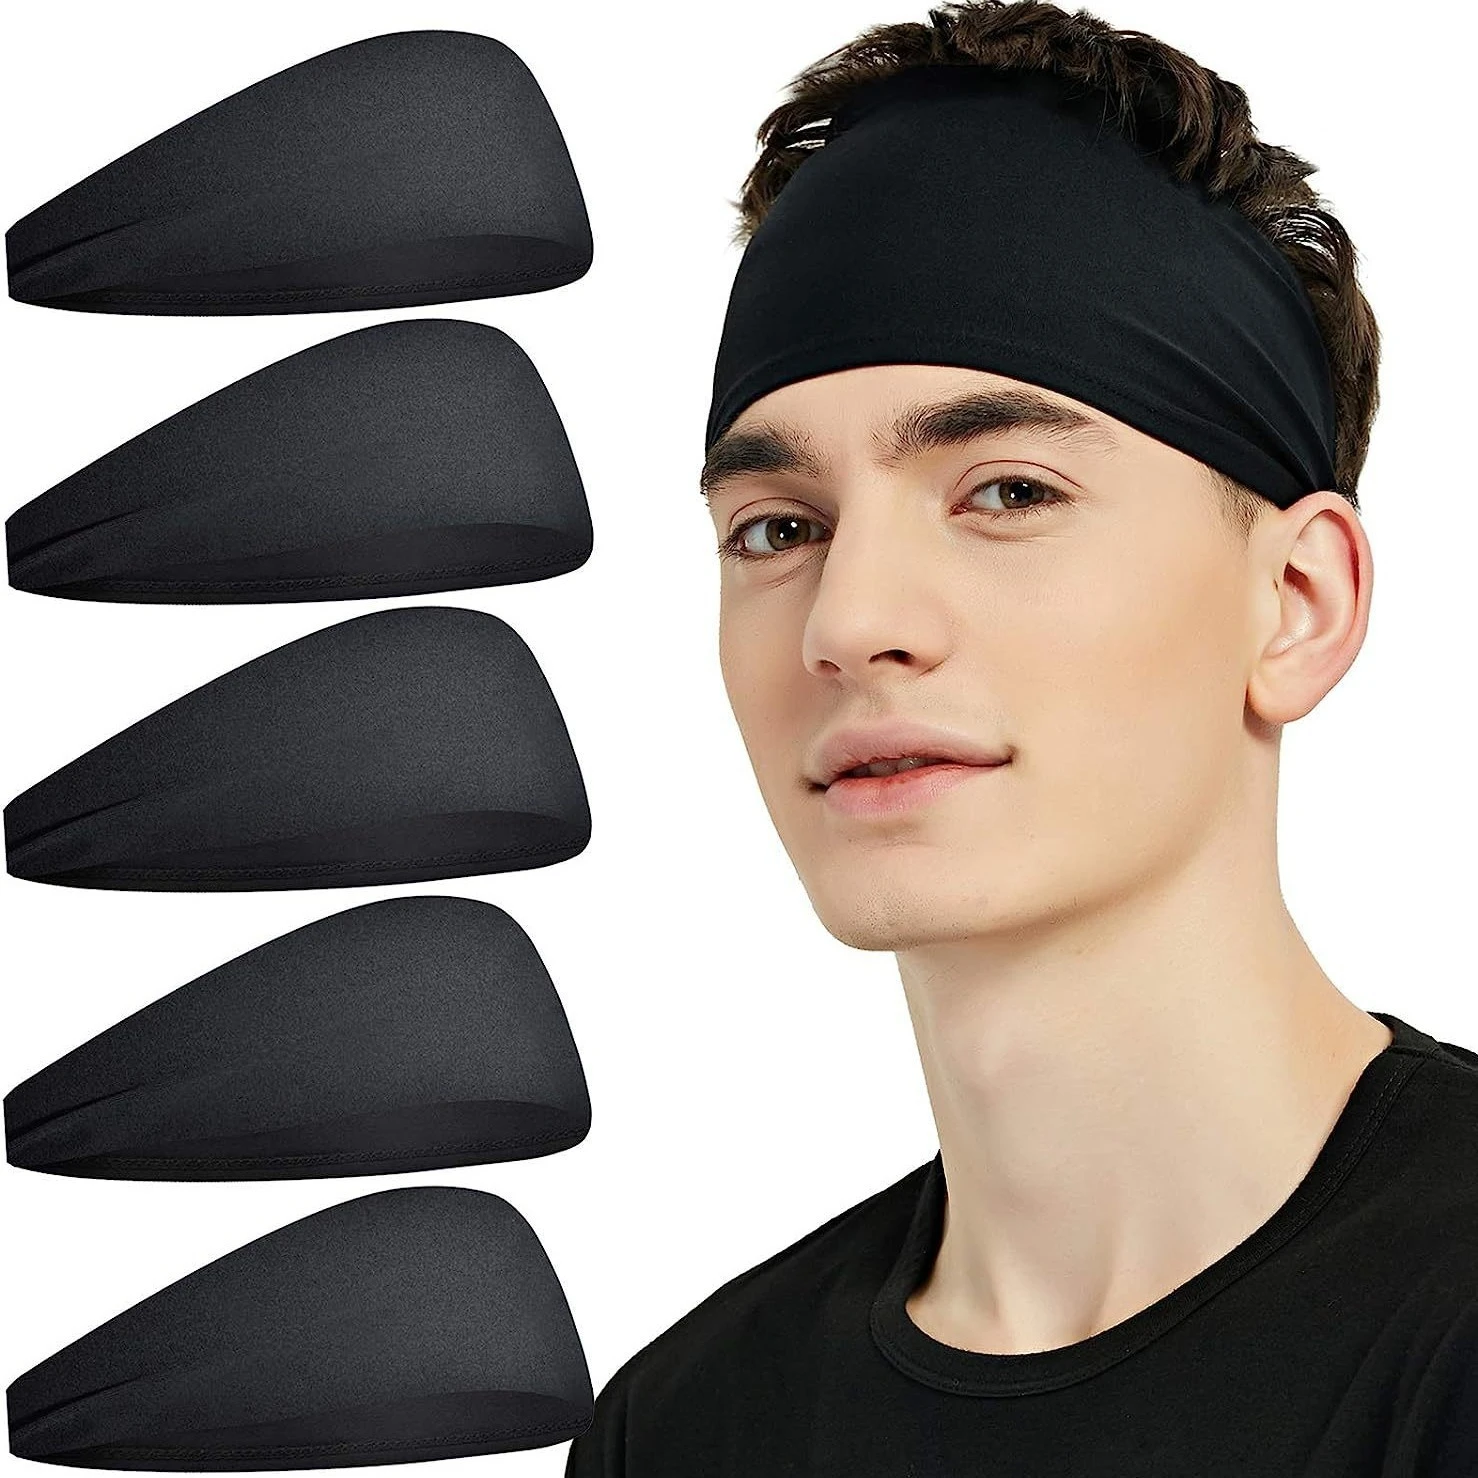 

Sports Headbands Solid Color Elastic Non Slip Quick Dry Workout Fitness Yoga Unisex Hairband Sweatband Bandana Hair Accessories